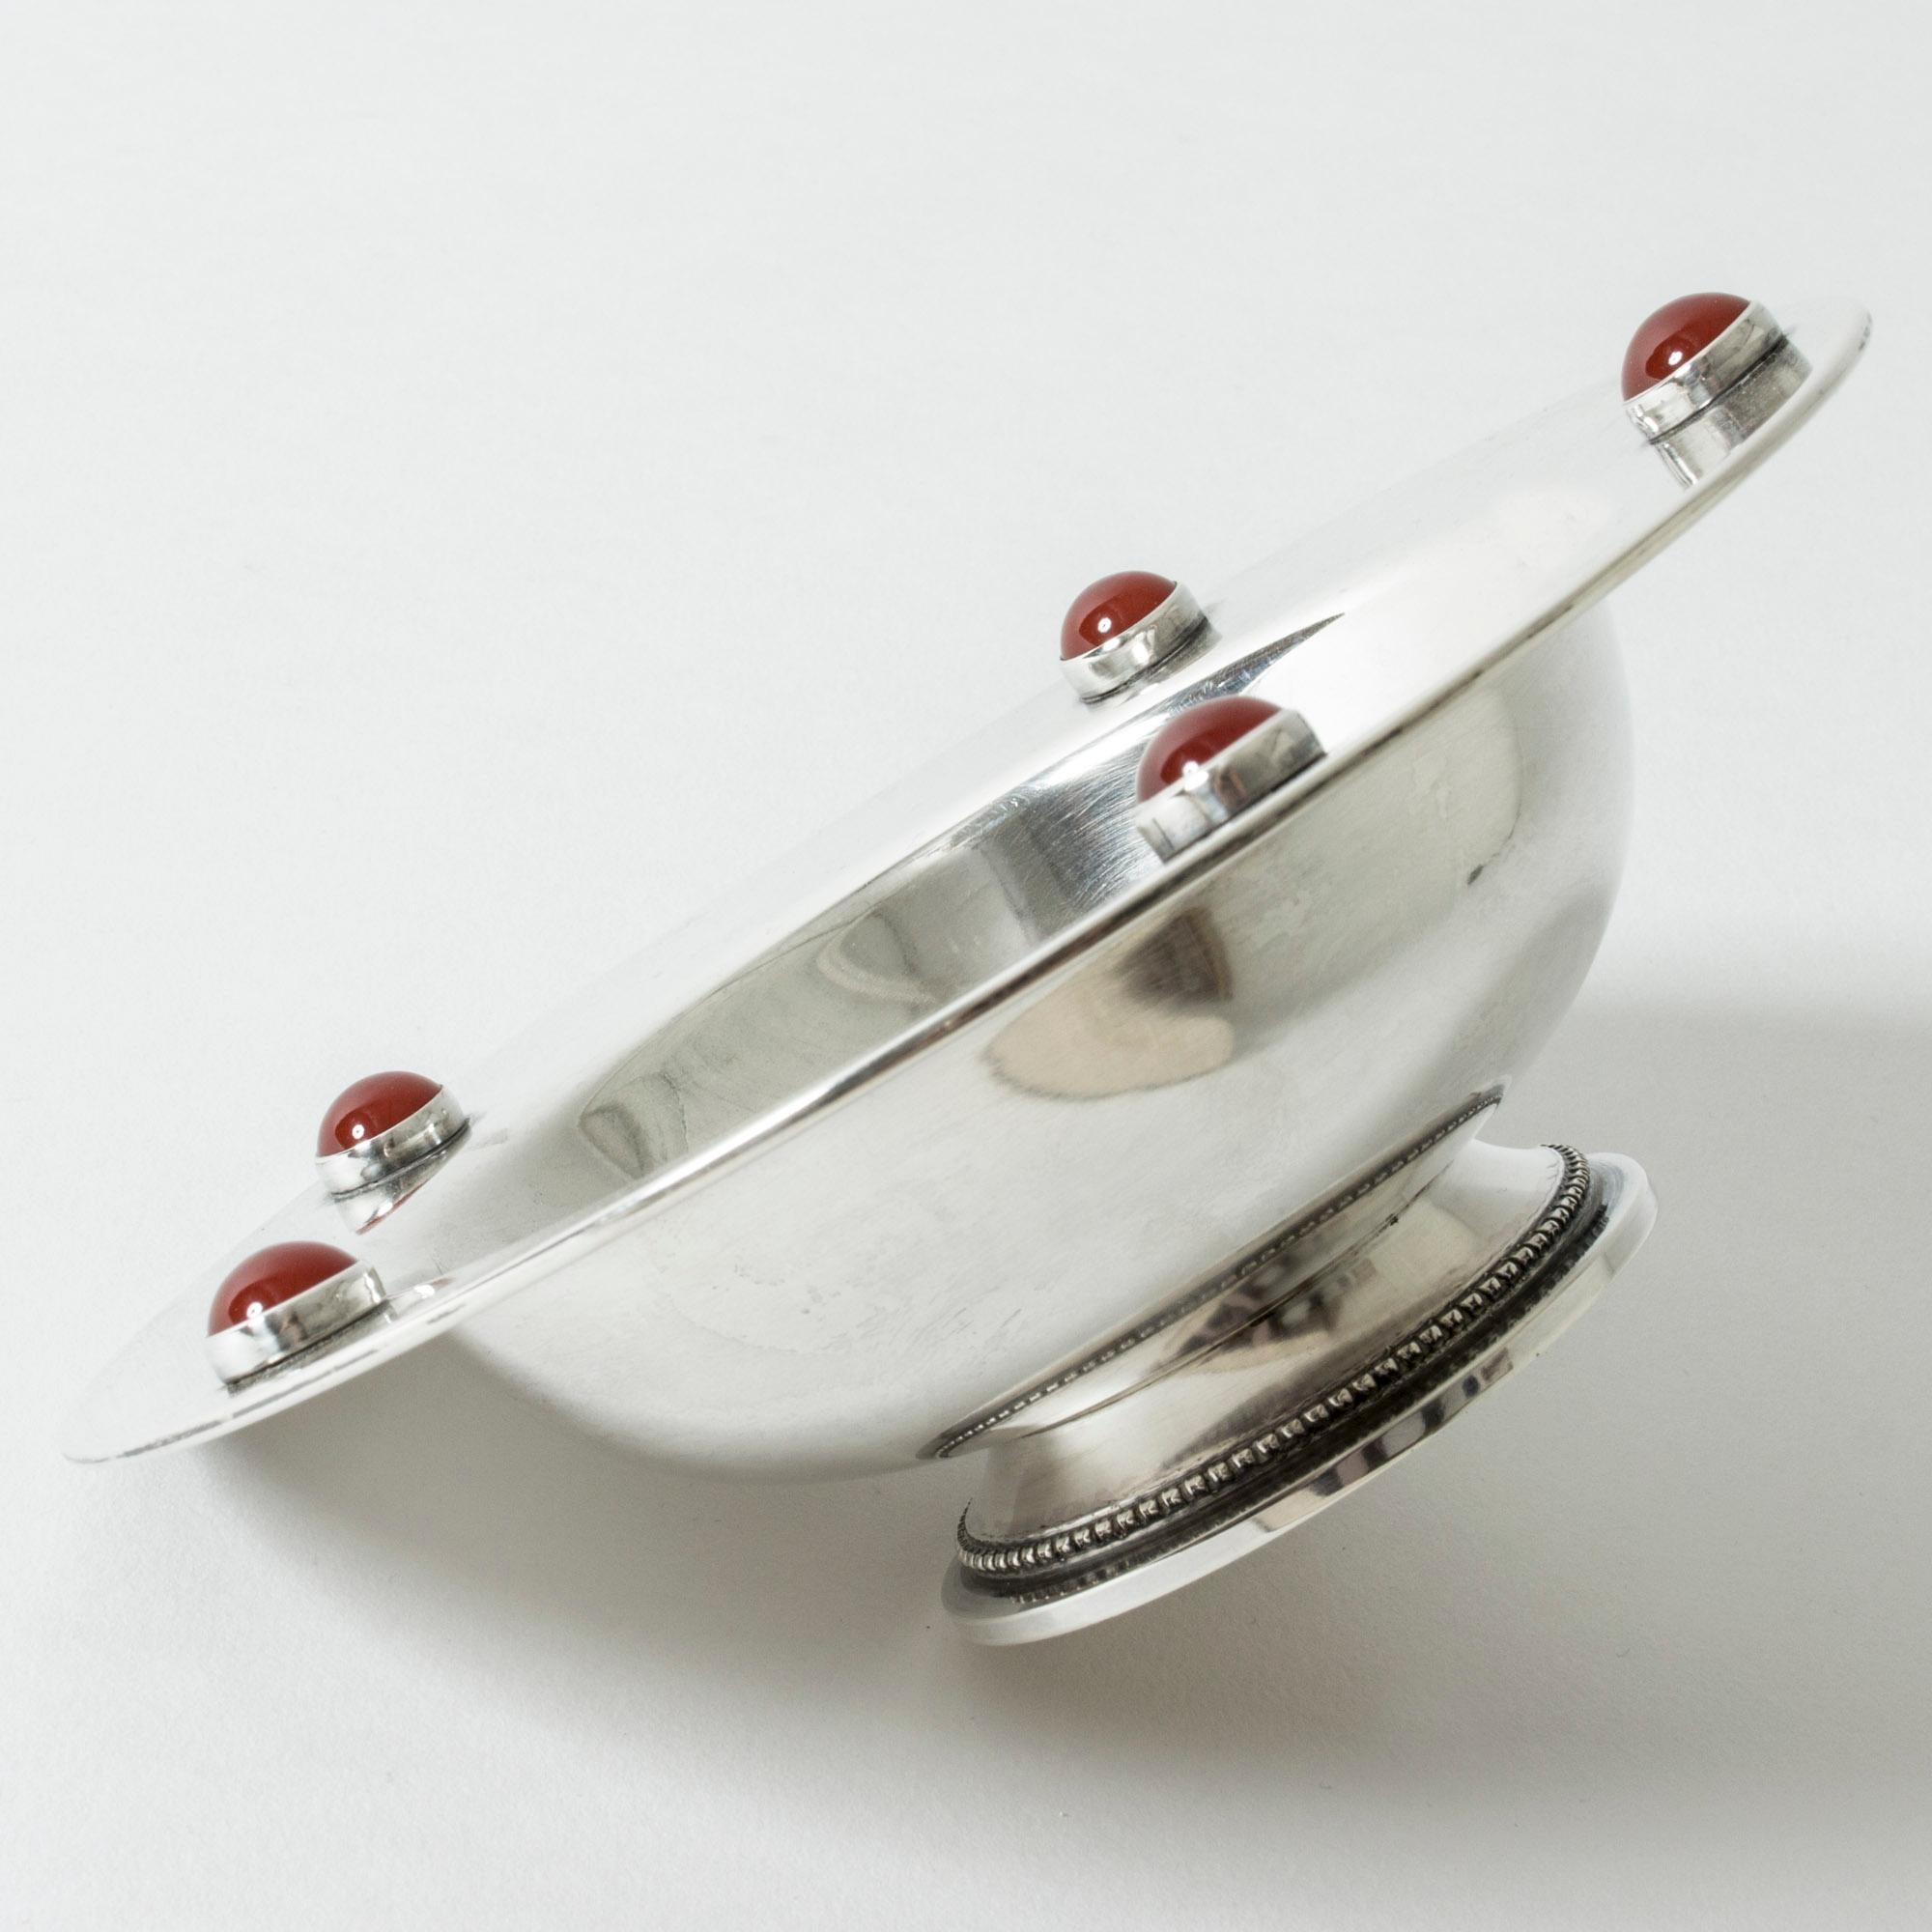 Elegant Danish midcentury silver bowl, in a smooth, streamlined design. Decorated with five round carnelian stones that contrast beautifully with the cool silver. Decorative pattern around the base.